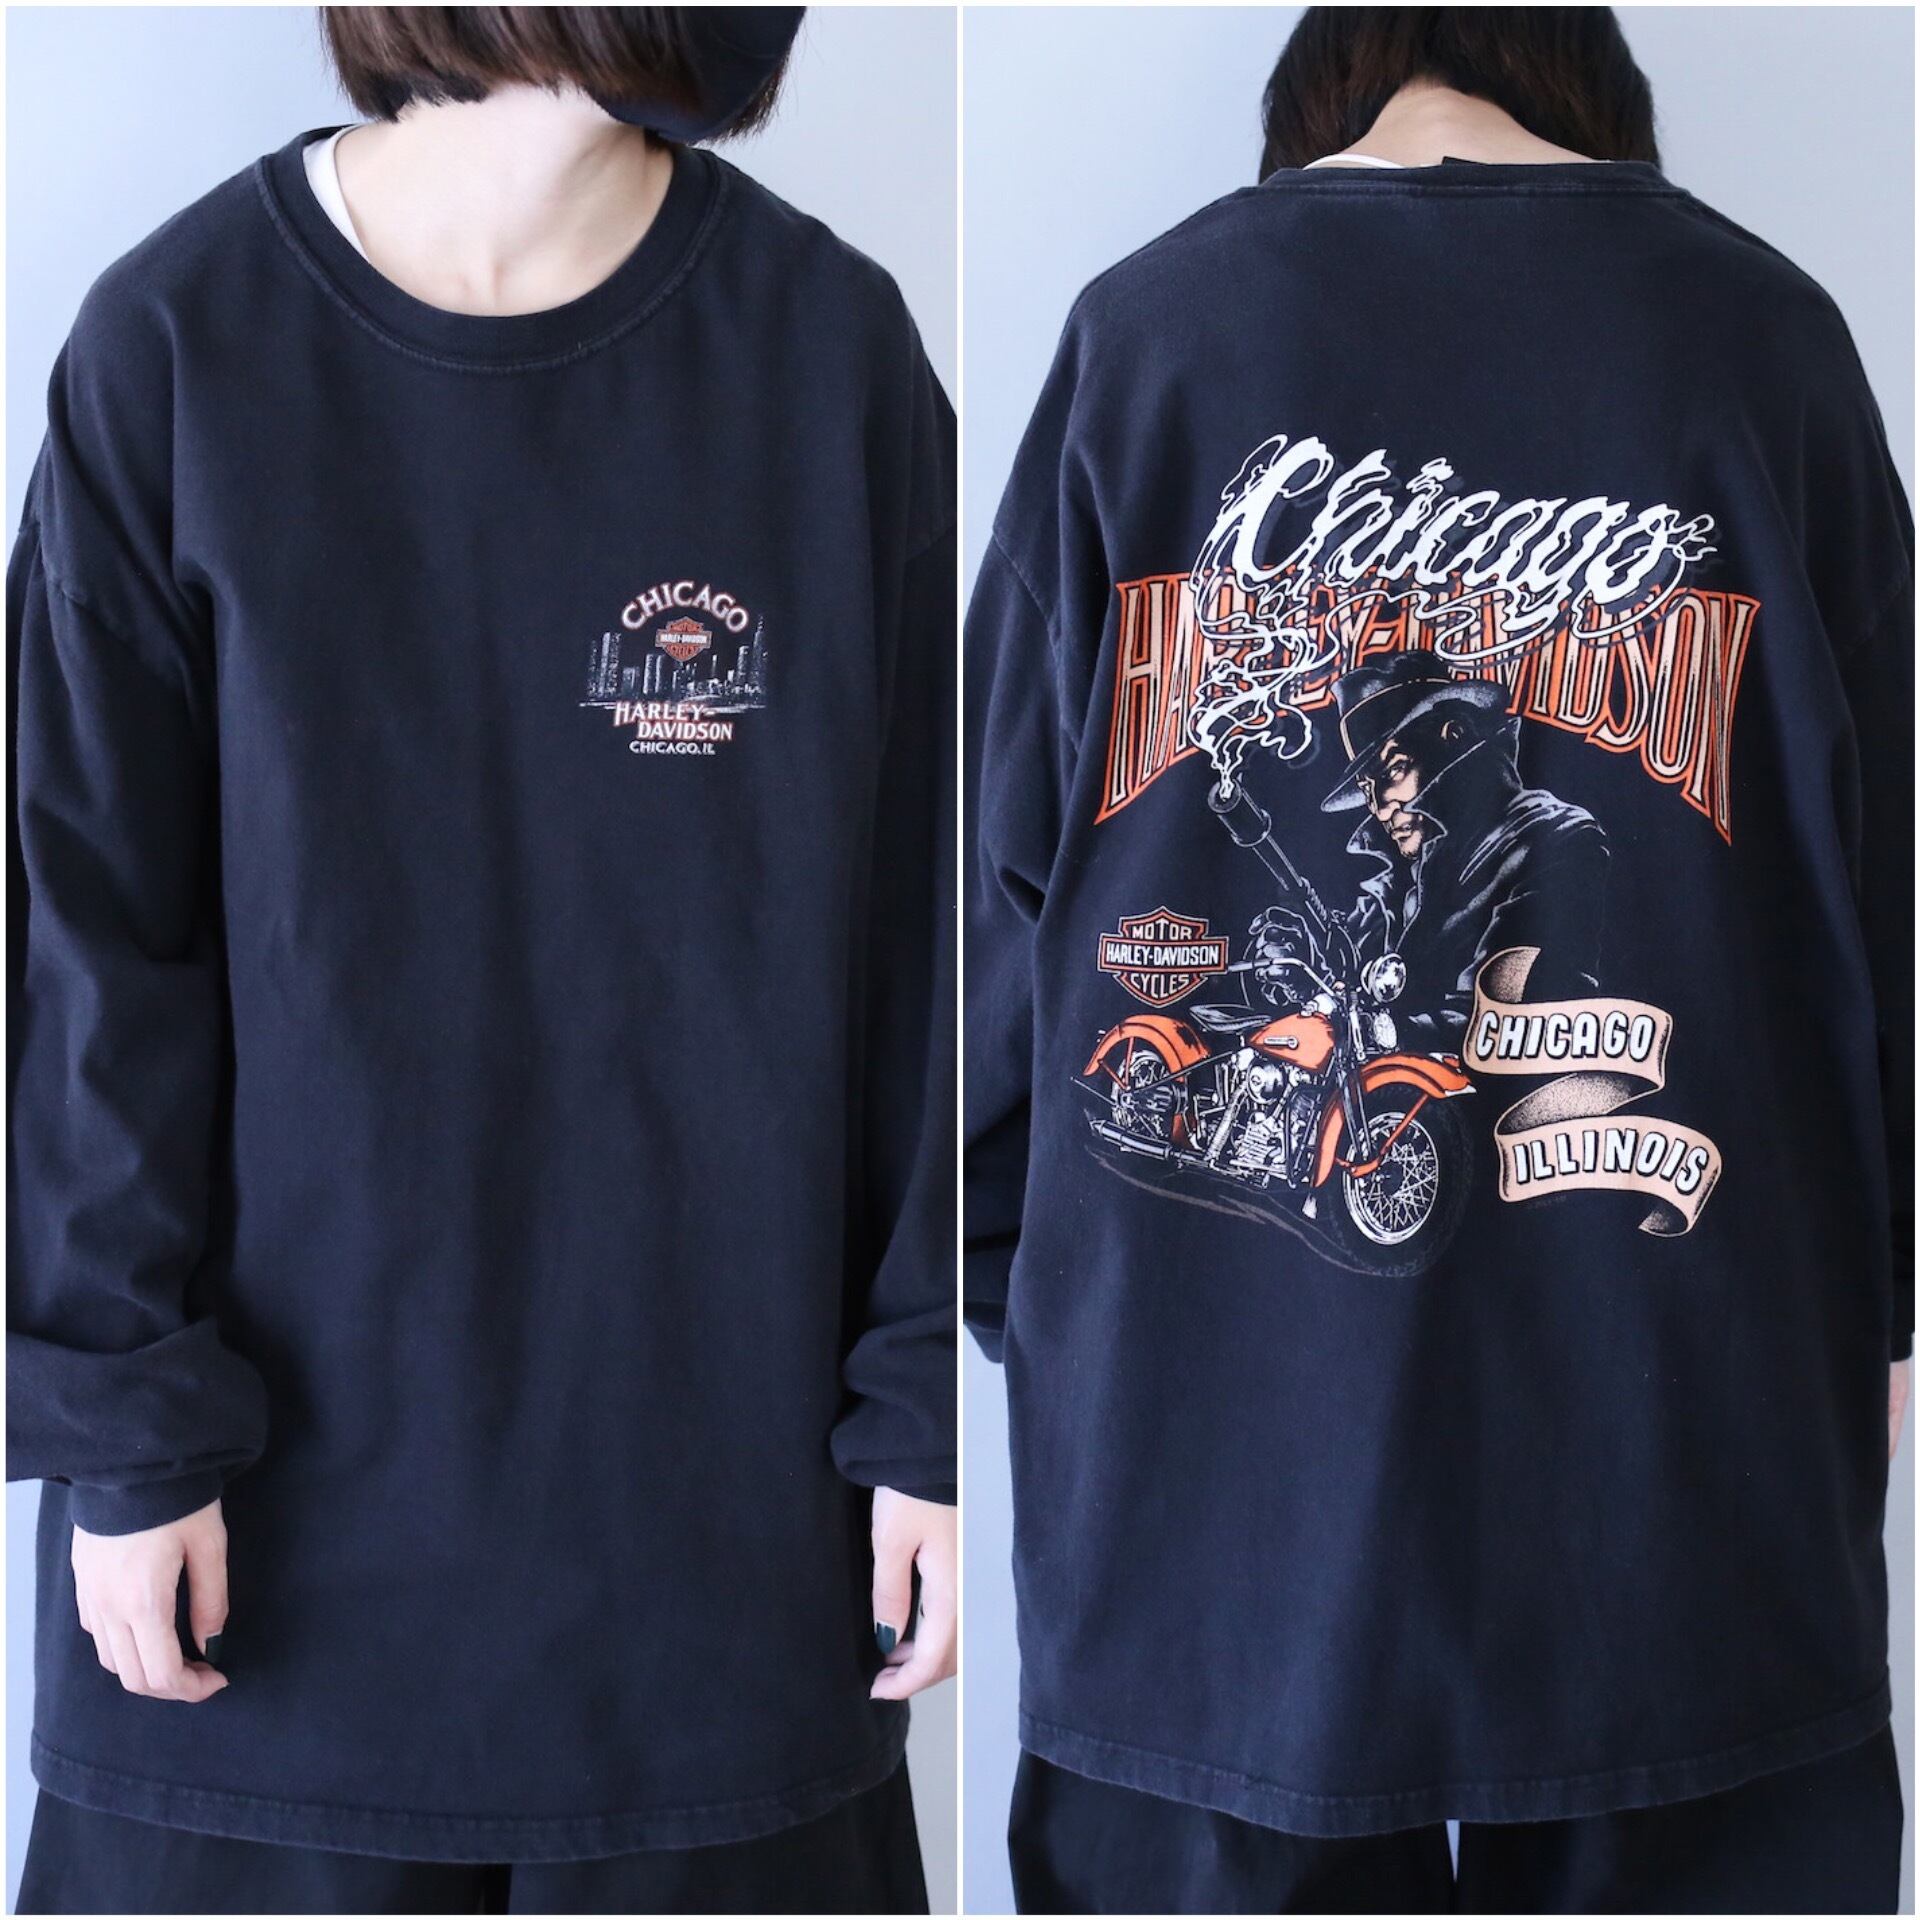 "HARLEY-DAVIDSON" front and back print loose silhouette l/s tee